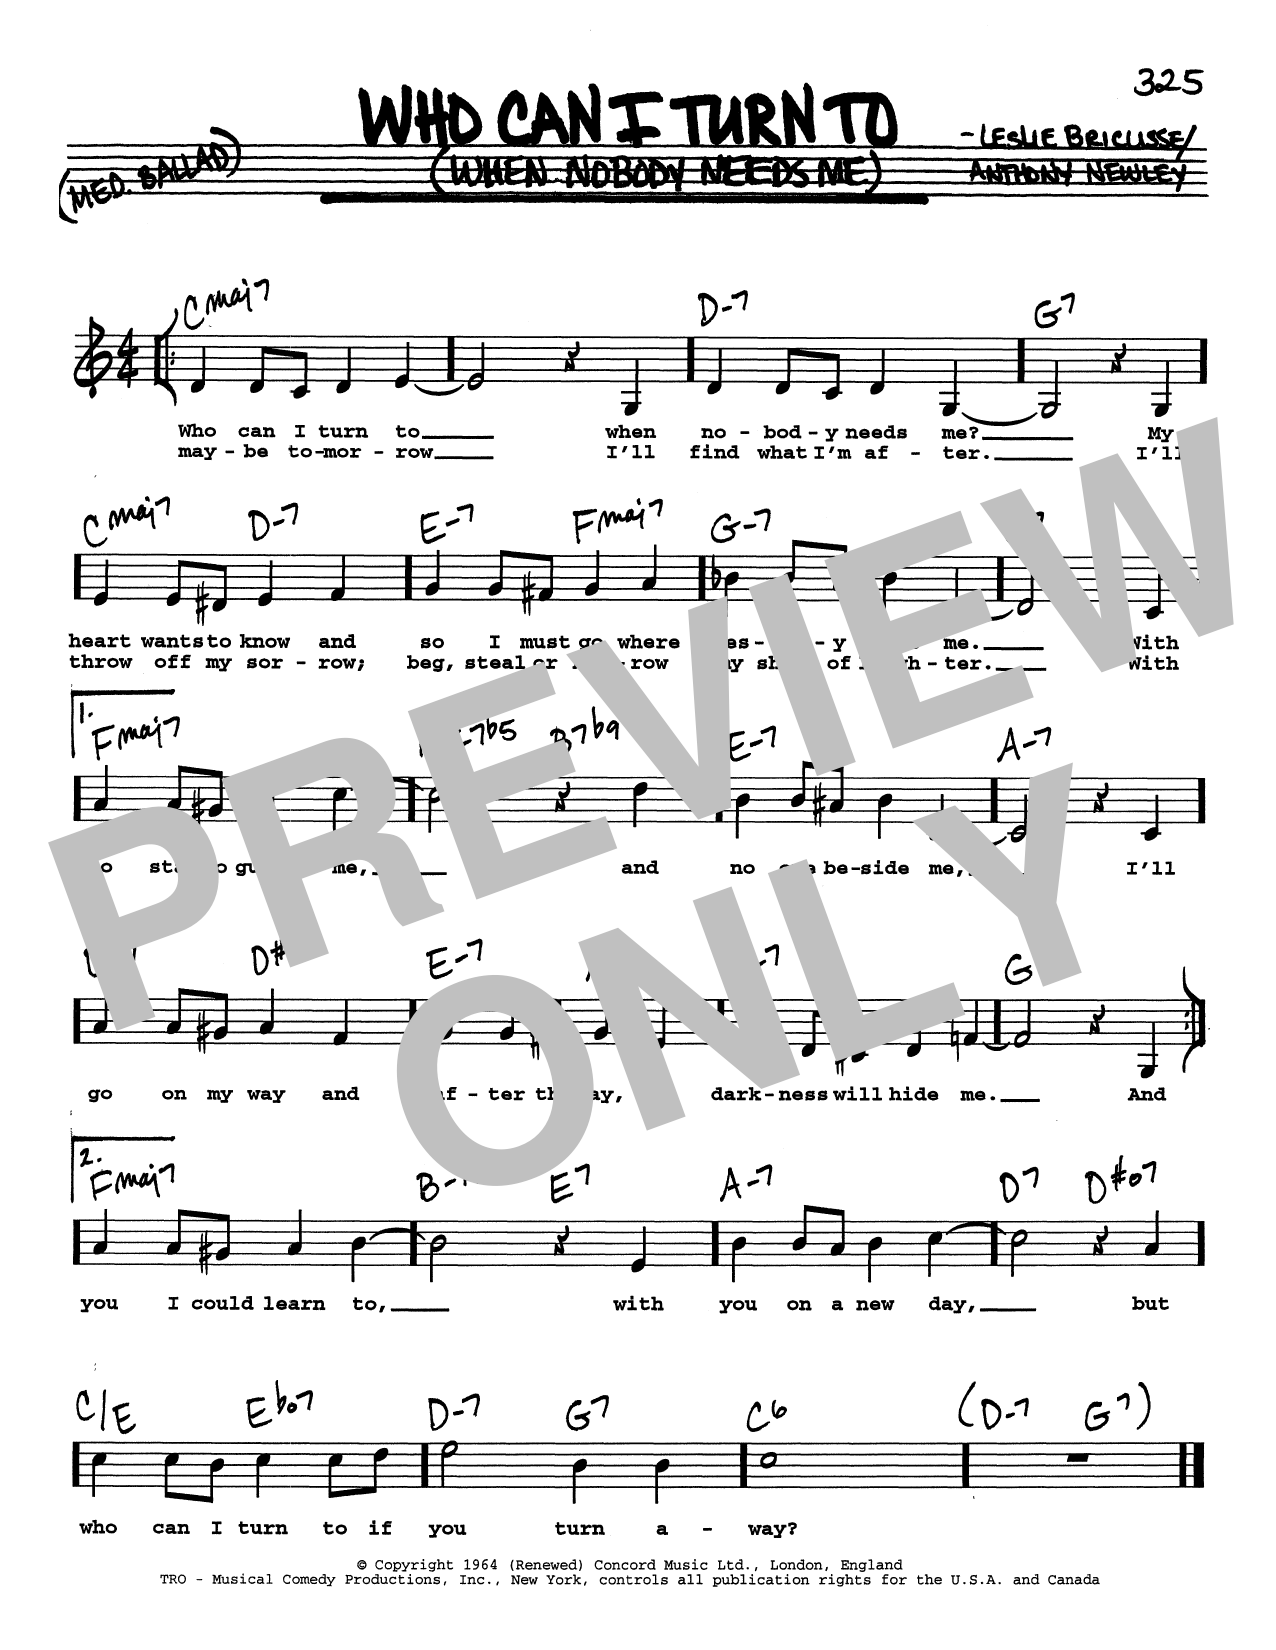 Leslie Bricusse Who Can I Turn To (When Nobody Needs Me) (Low Voice) sheet music notes printable PDF score